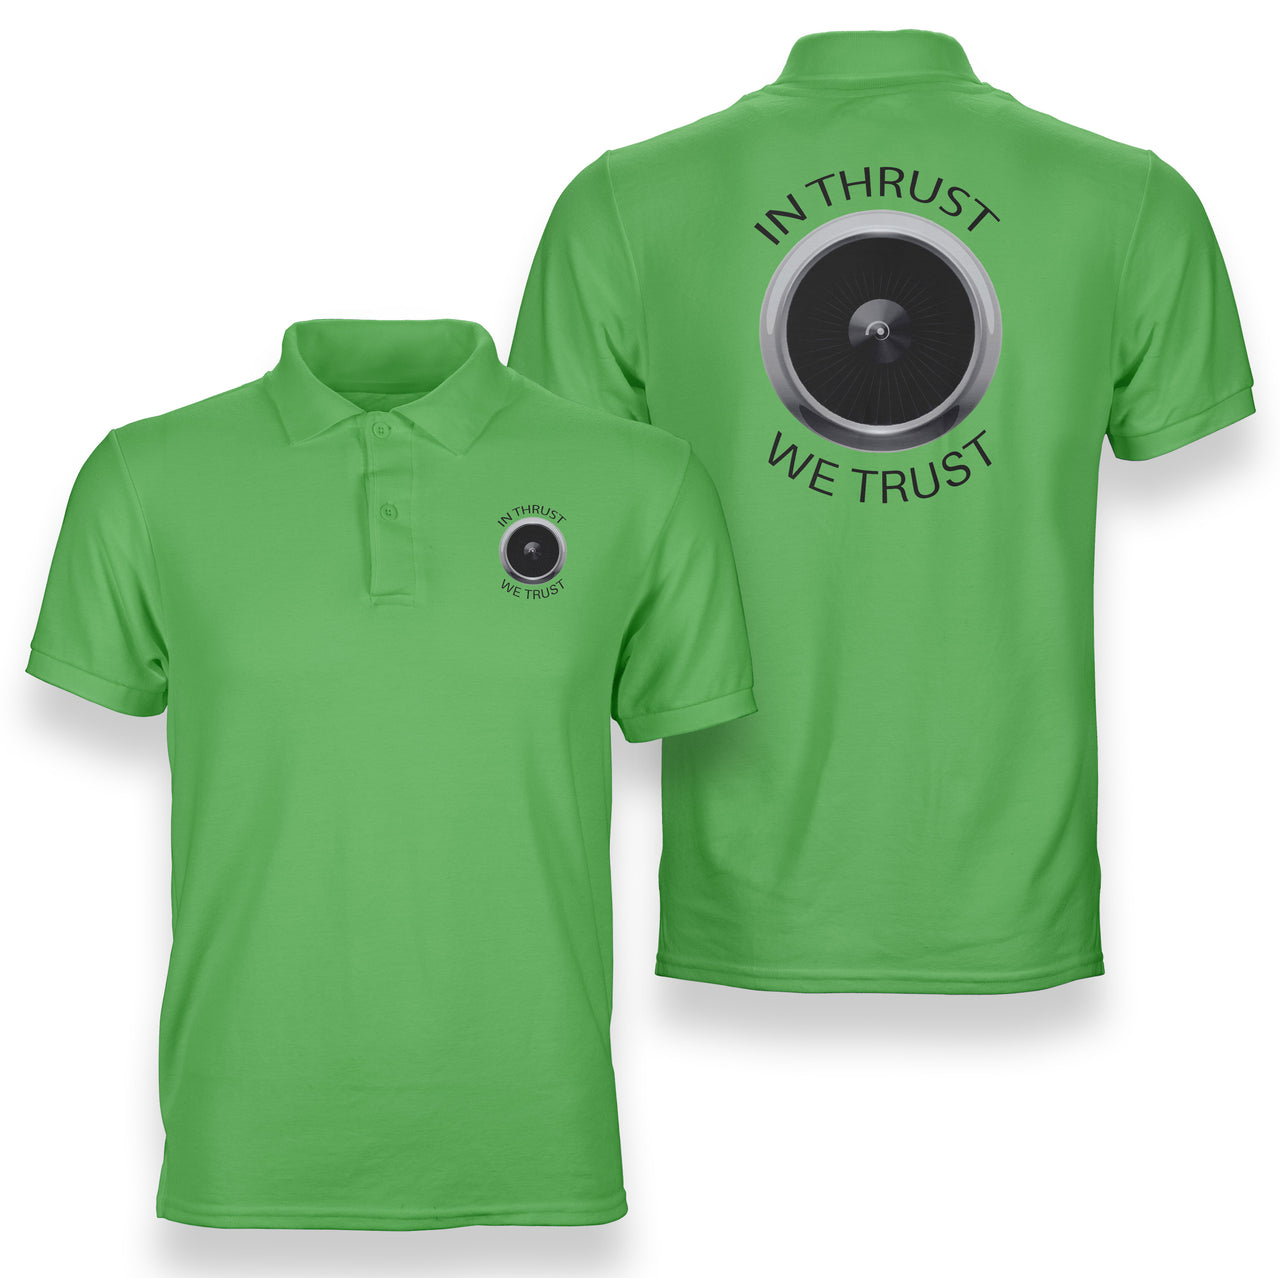 In Thrust We Trust Designed Double Side Polo T-Shirts